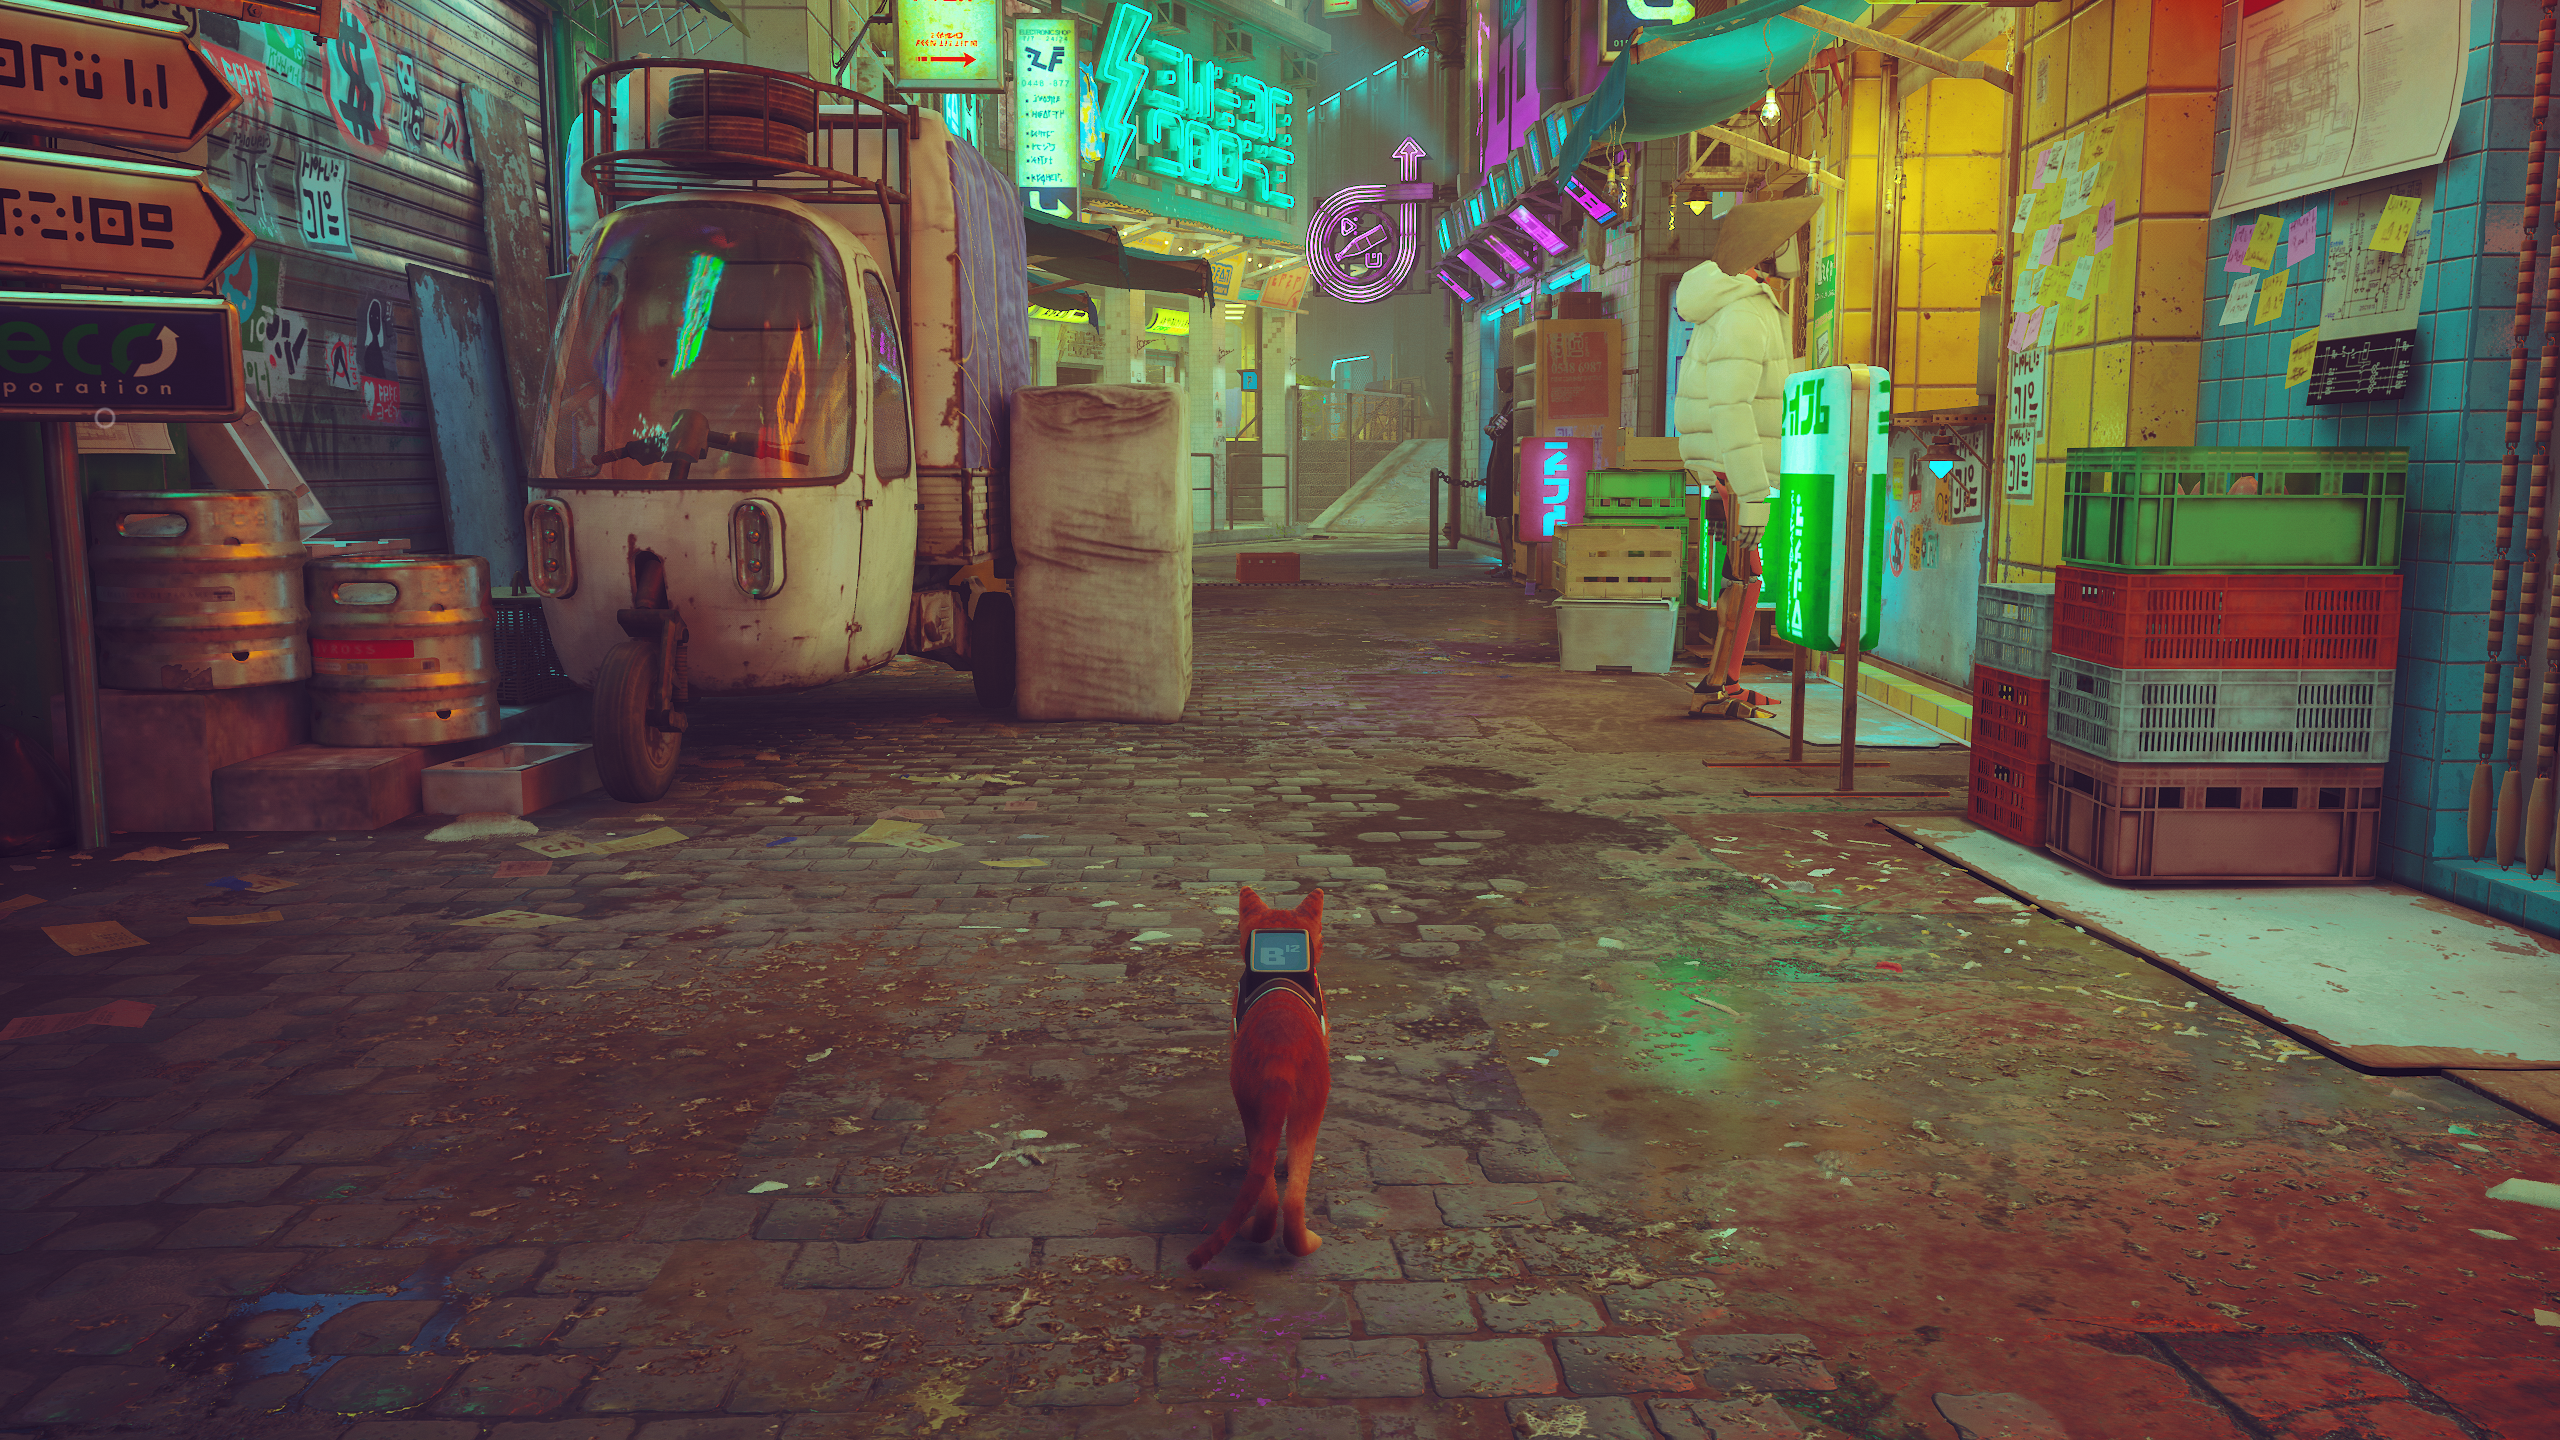 Stray on its Low quality settings, showing a leon-lit street scene.